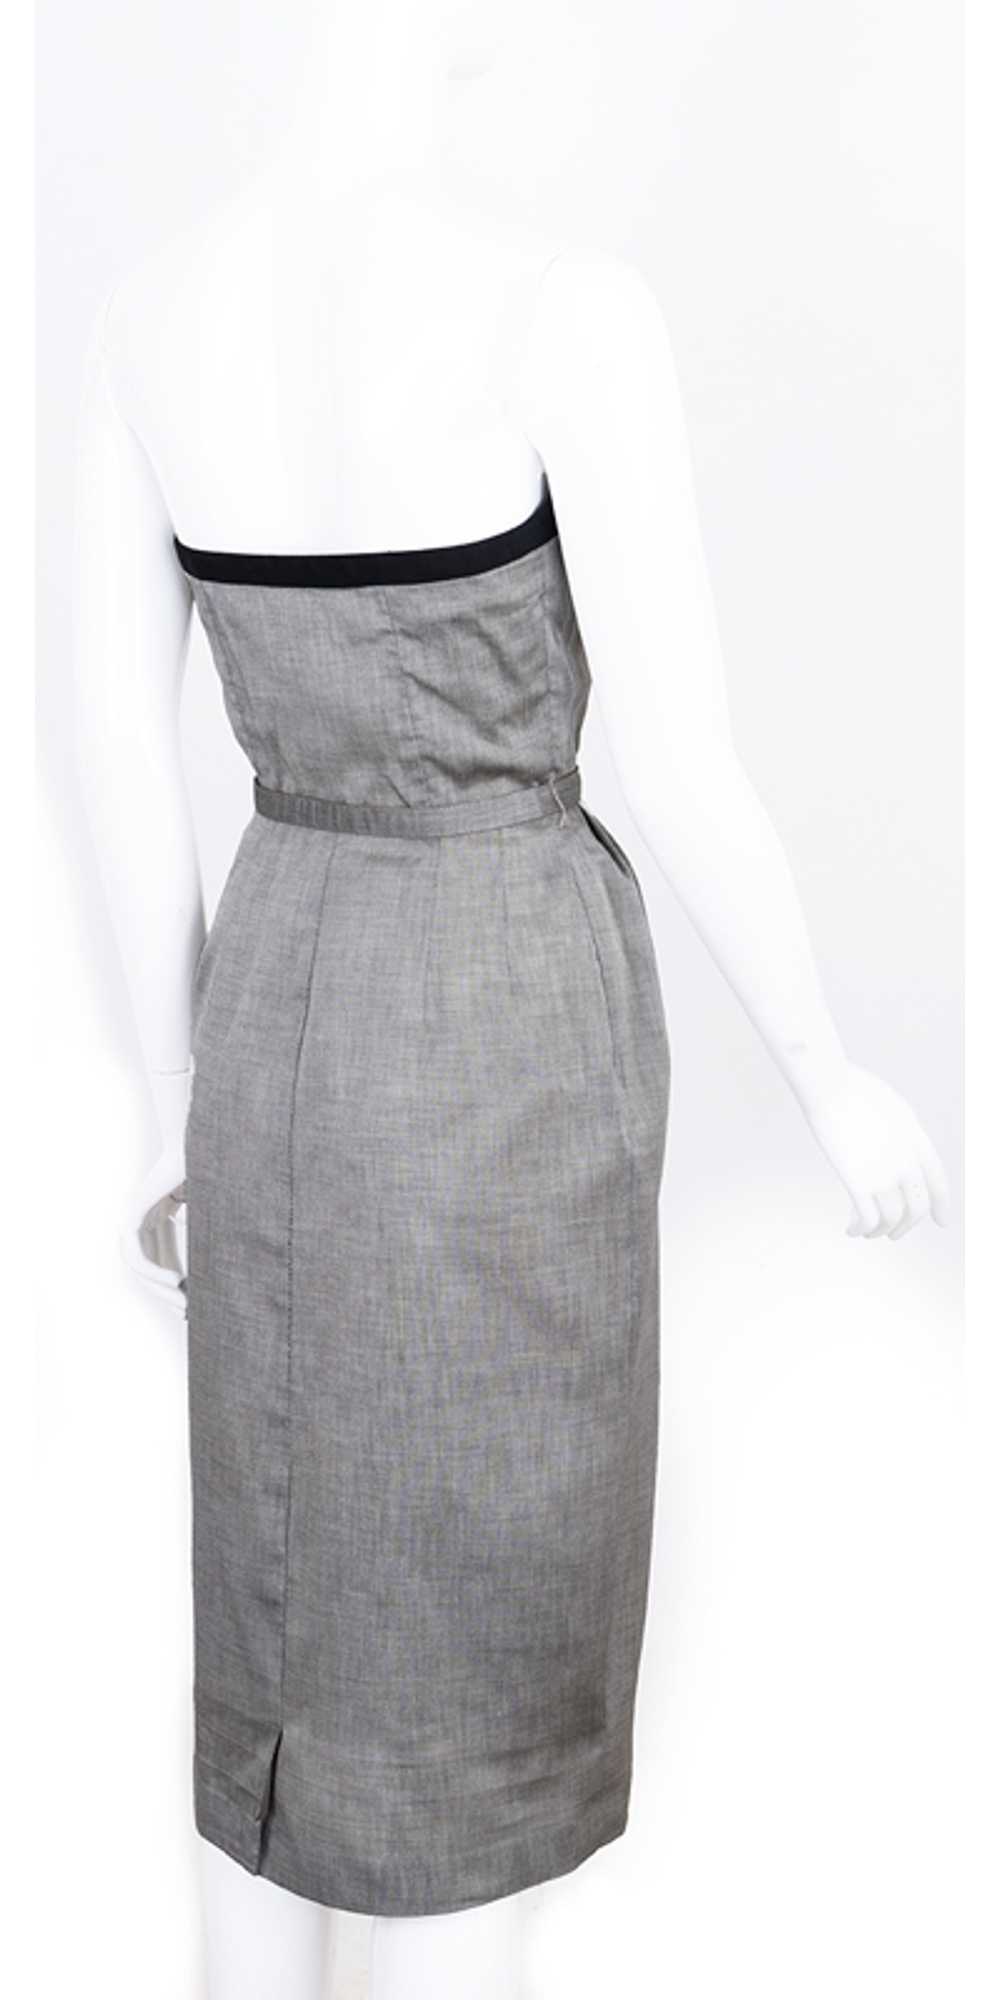 1950s Strapless Dress with Jacket - image 7